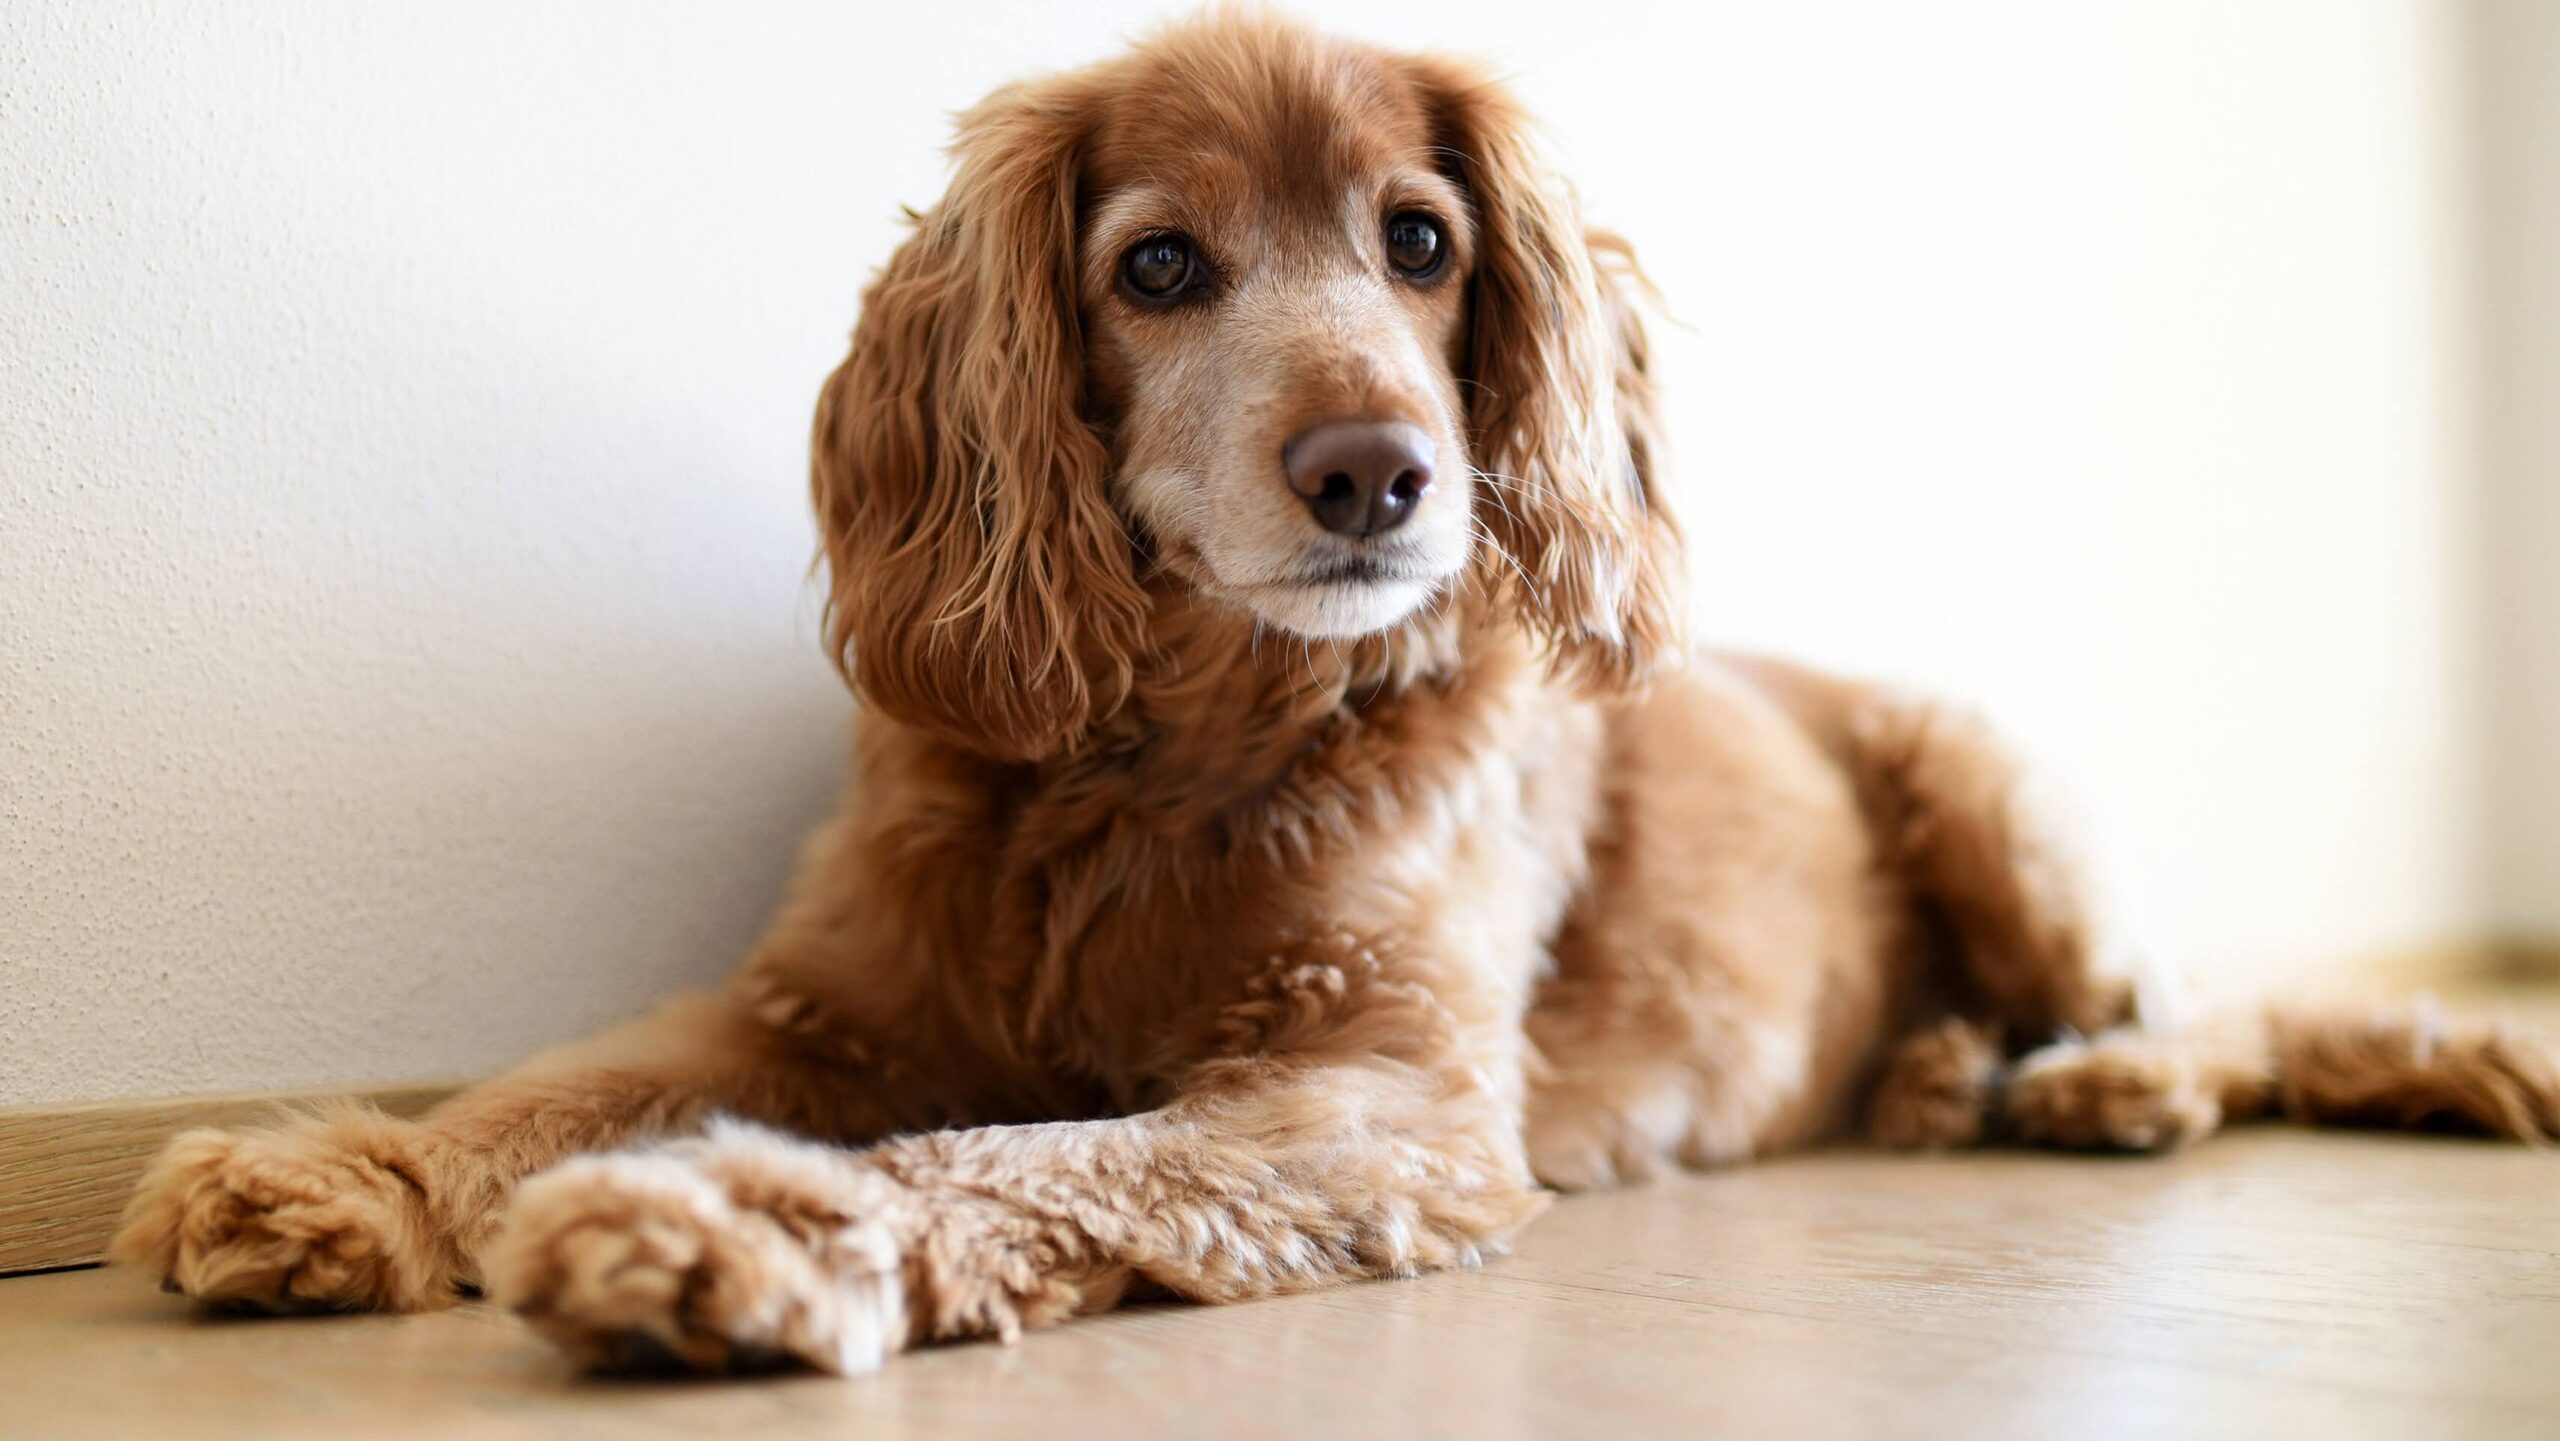 Cute blond cocker spaniel resting on the floor in a low angle view as the dog looks alertly at the camera indoors at home